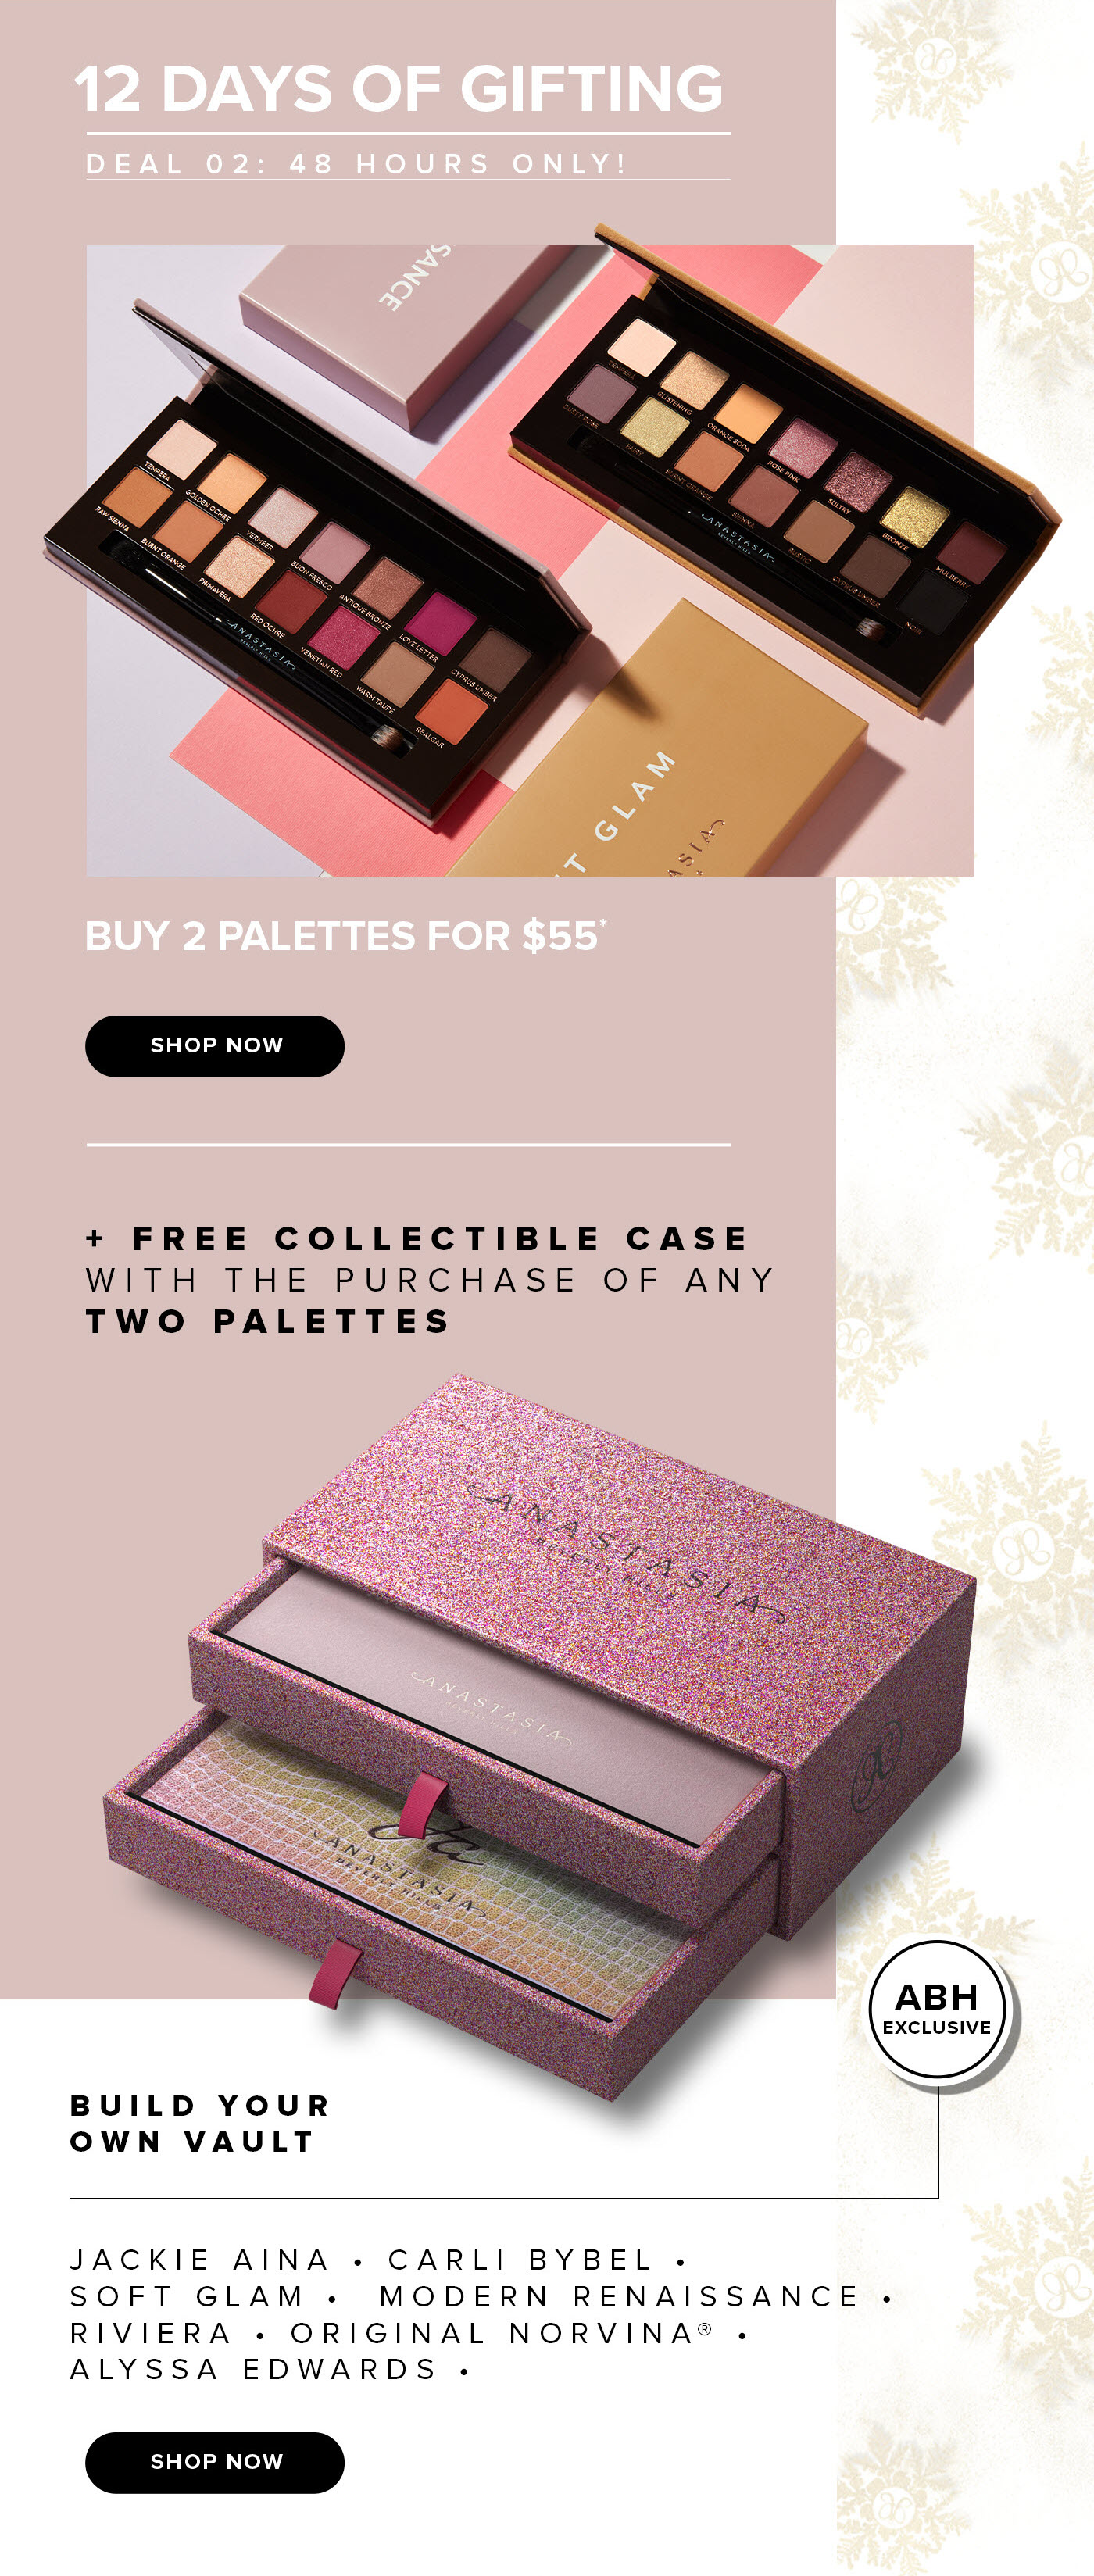 12 Days of Gifting - Deal 2: Buy 2 Palettes for $55 + Free Collectible Case